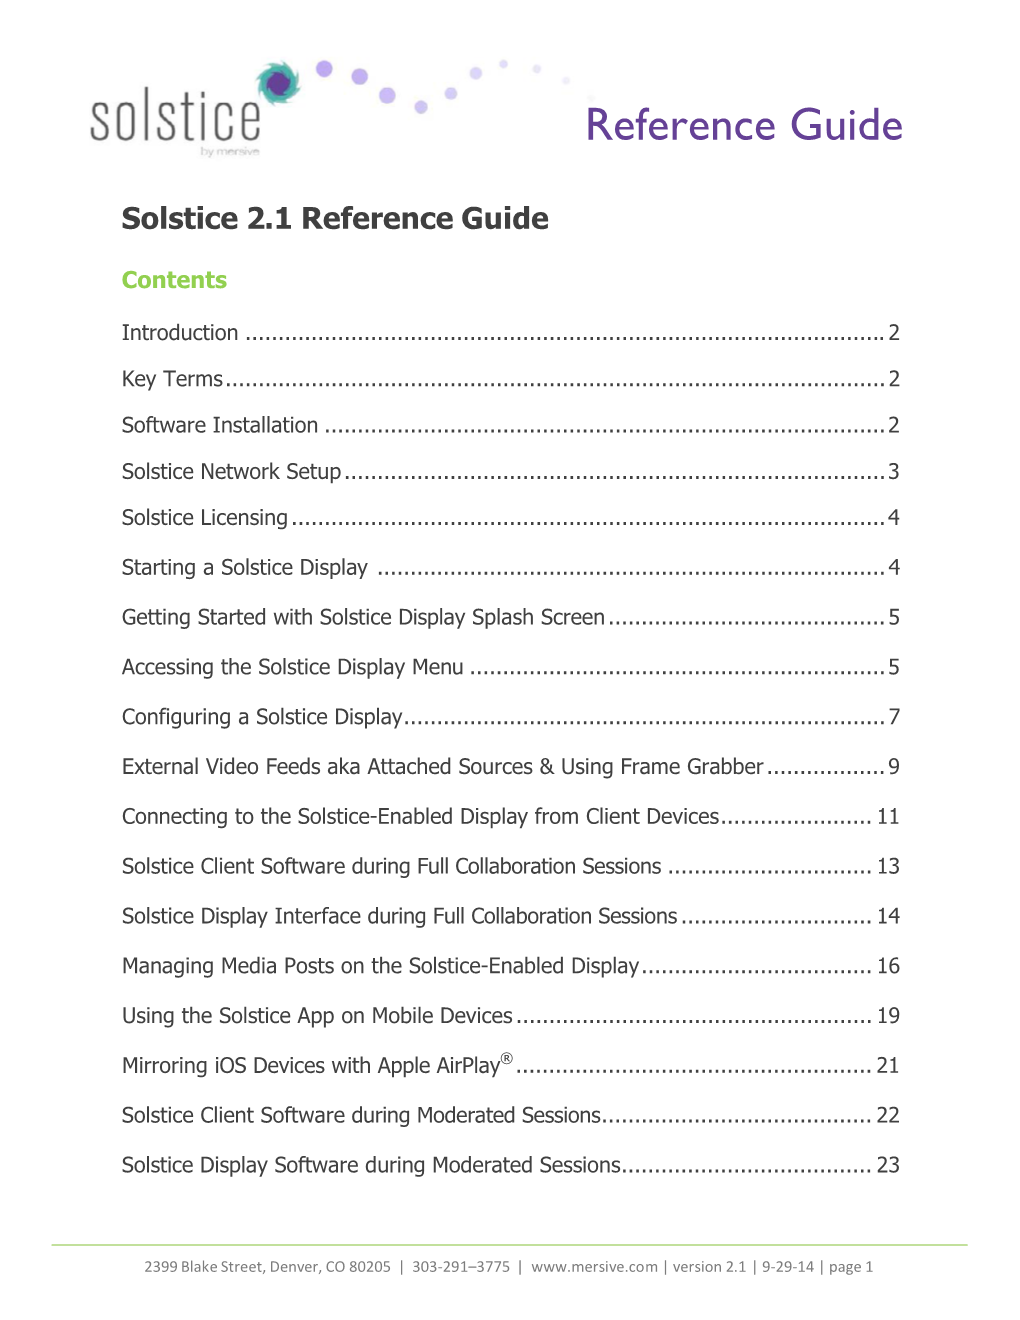 Solstice 2.1 Reference Guide